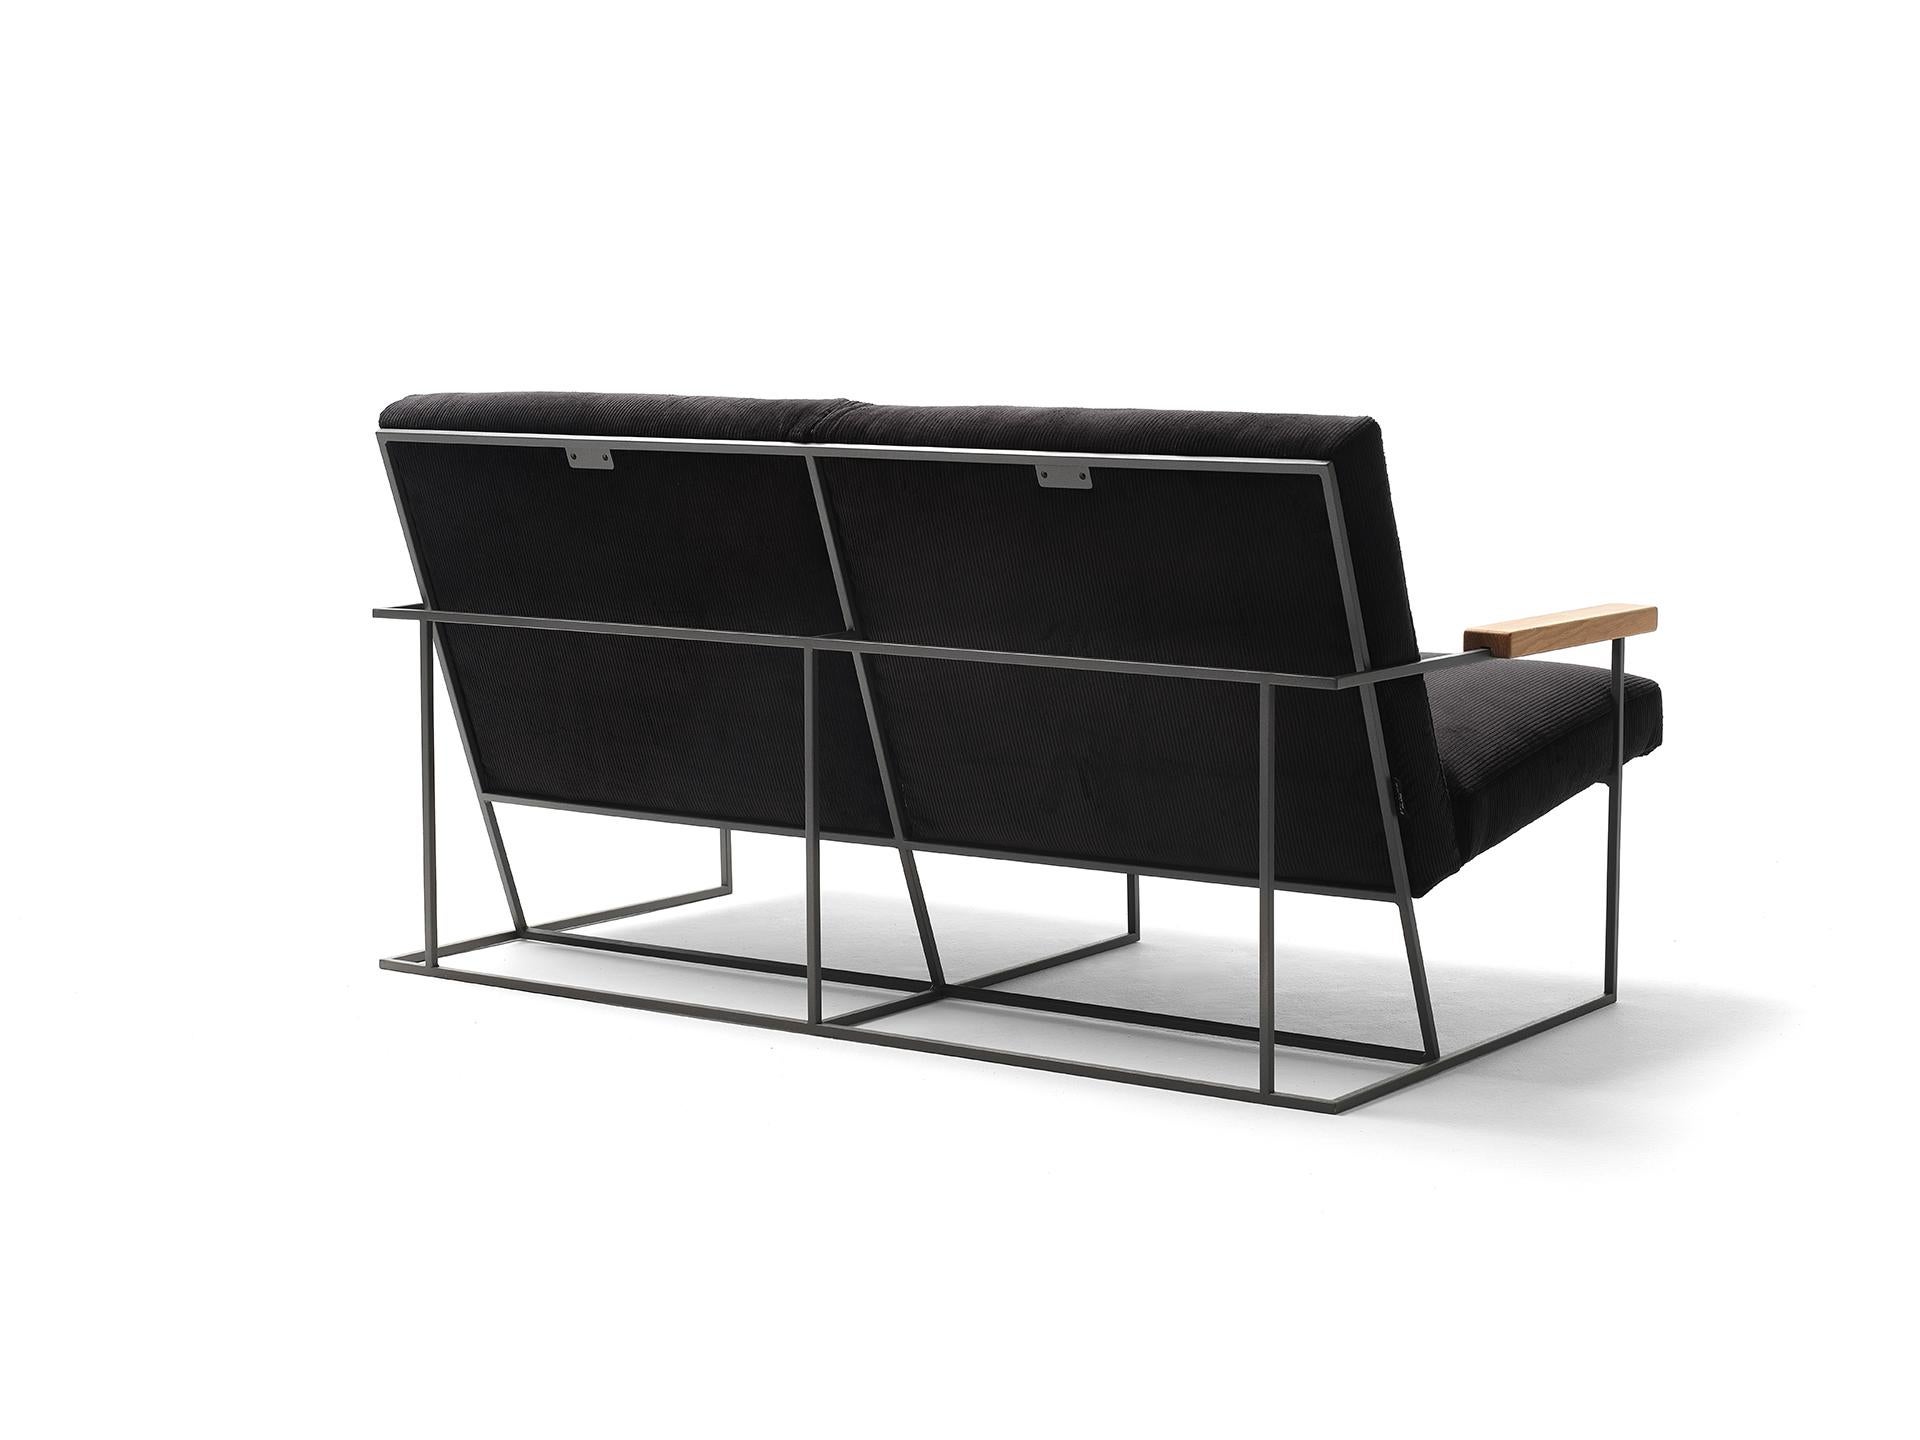 The distinctive linear geometry and the visual lightness of the Gotham 2-seater come from its metal frame, a clean aerial structure that holds the seat and backrest cushions. These in contrast are generous and voluminous thus creating a visual